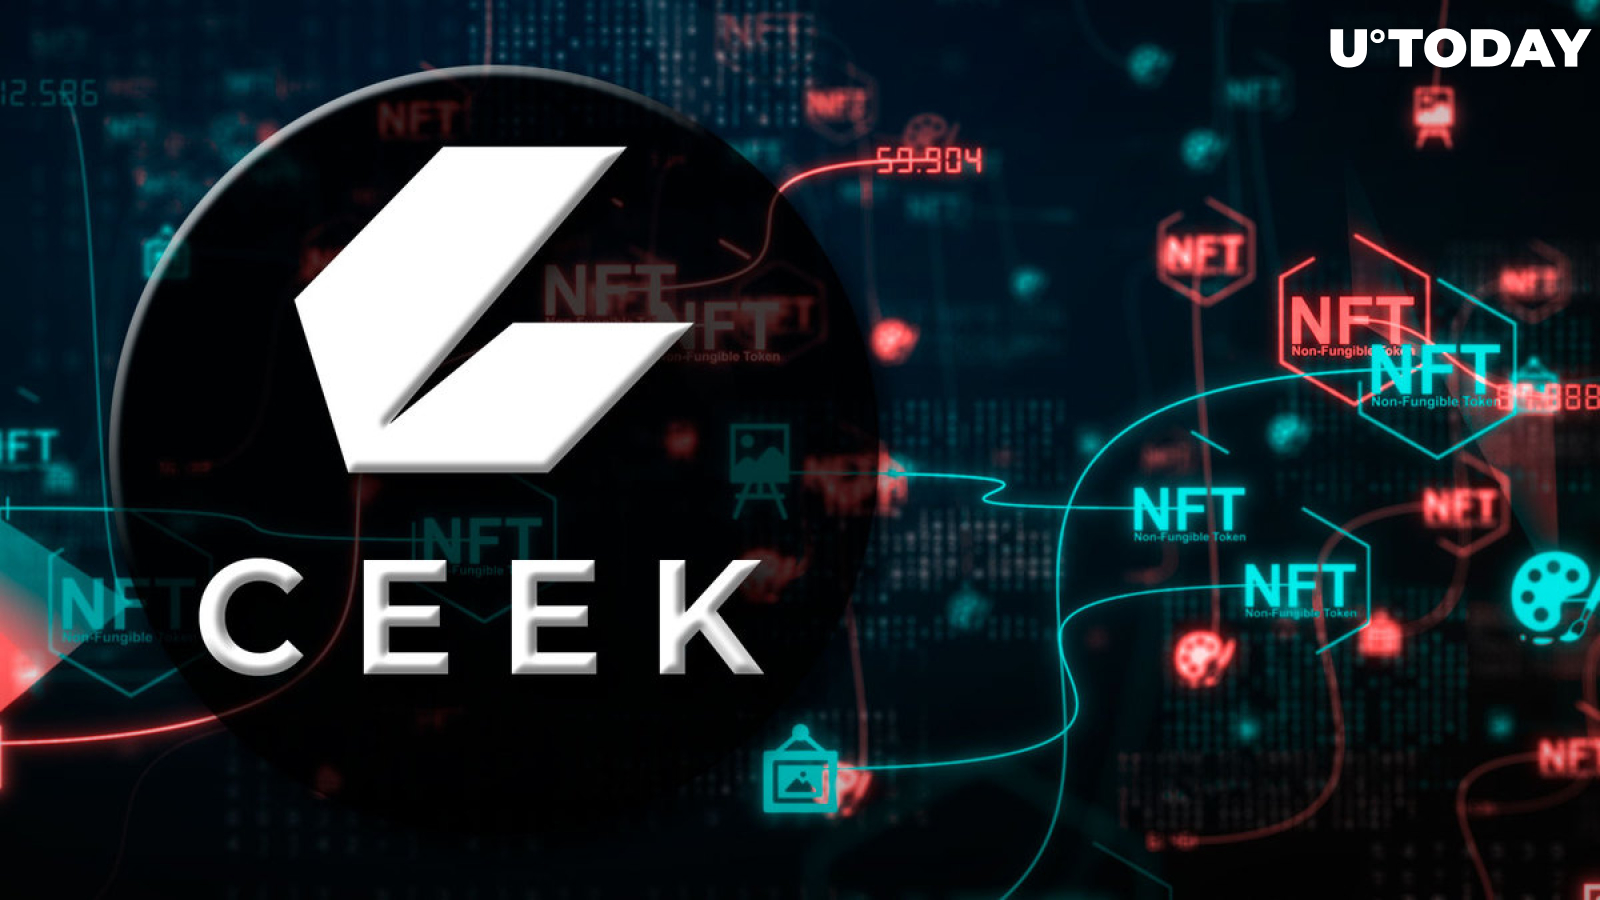 CEEK Celebrity-Backed Metaverse to Sell 10,000 Land Plots as NFTs